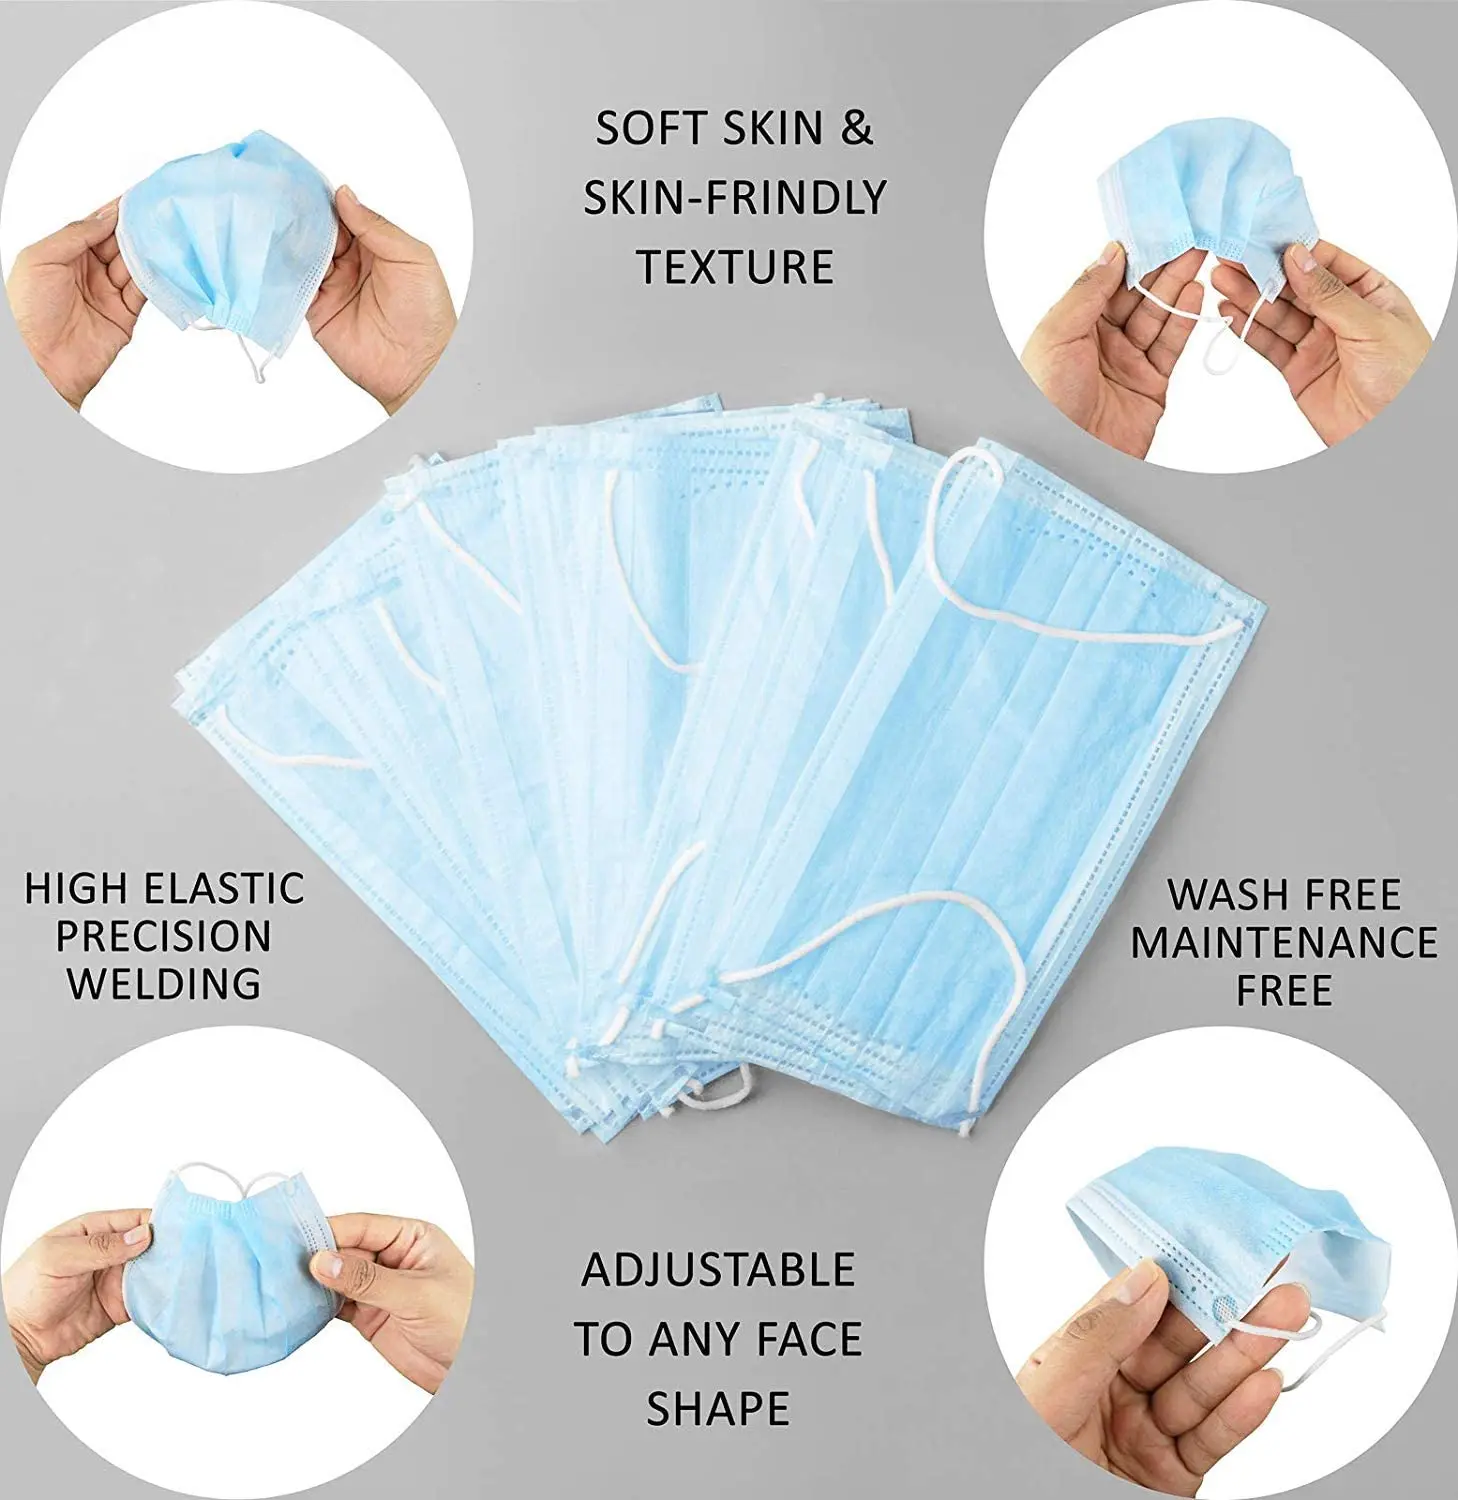 QIBU Health Stock Waterproof Surgical Mask 3PLY non-woven protective medical face mask